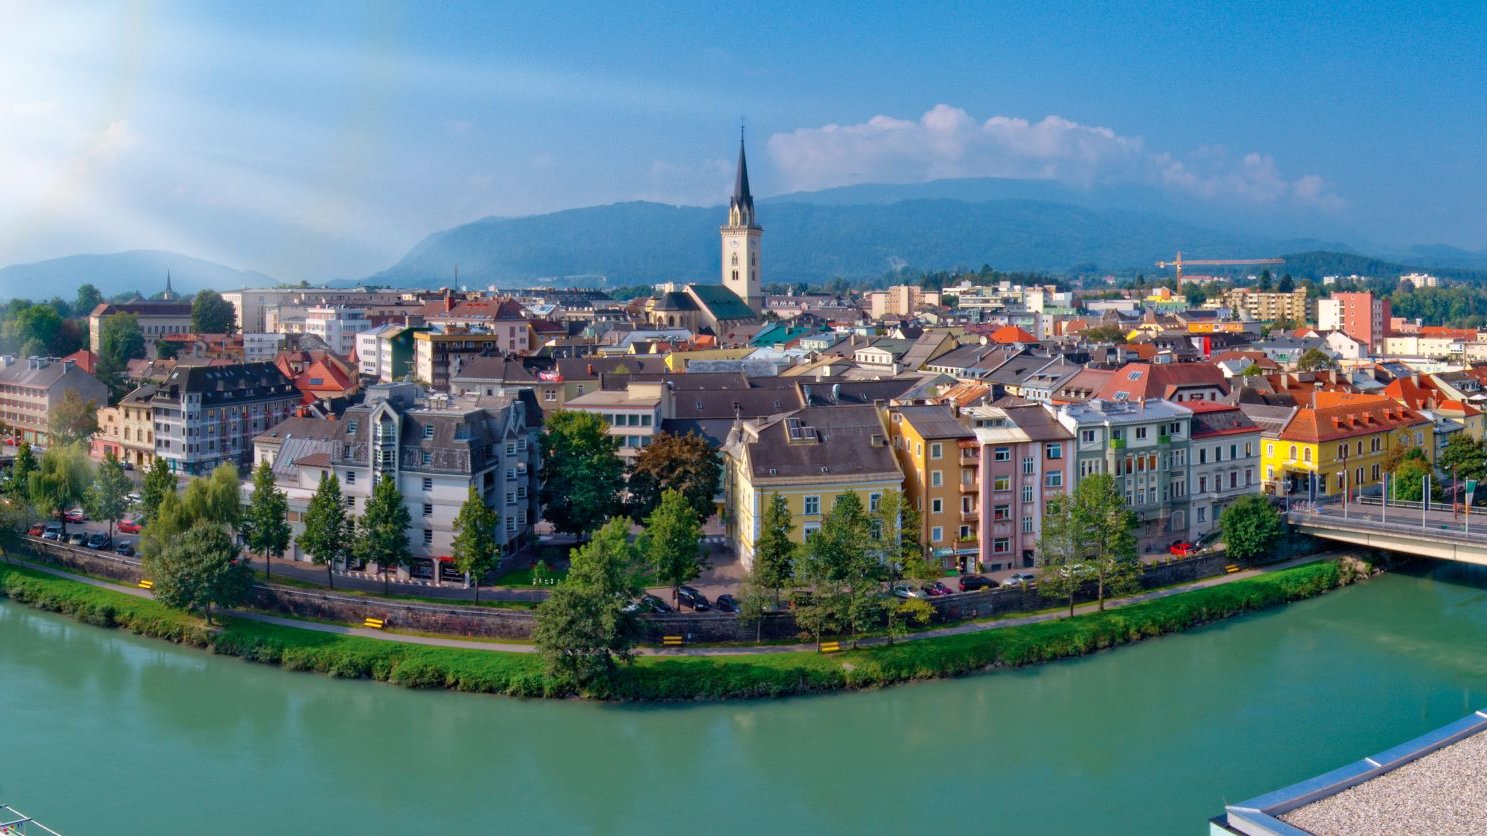 View onto the panorama of the City of Villach and the river Drau